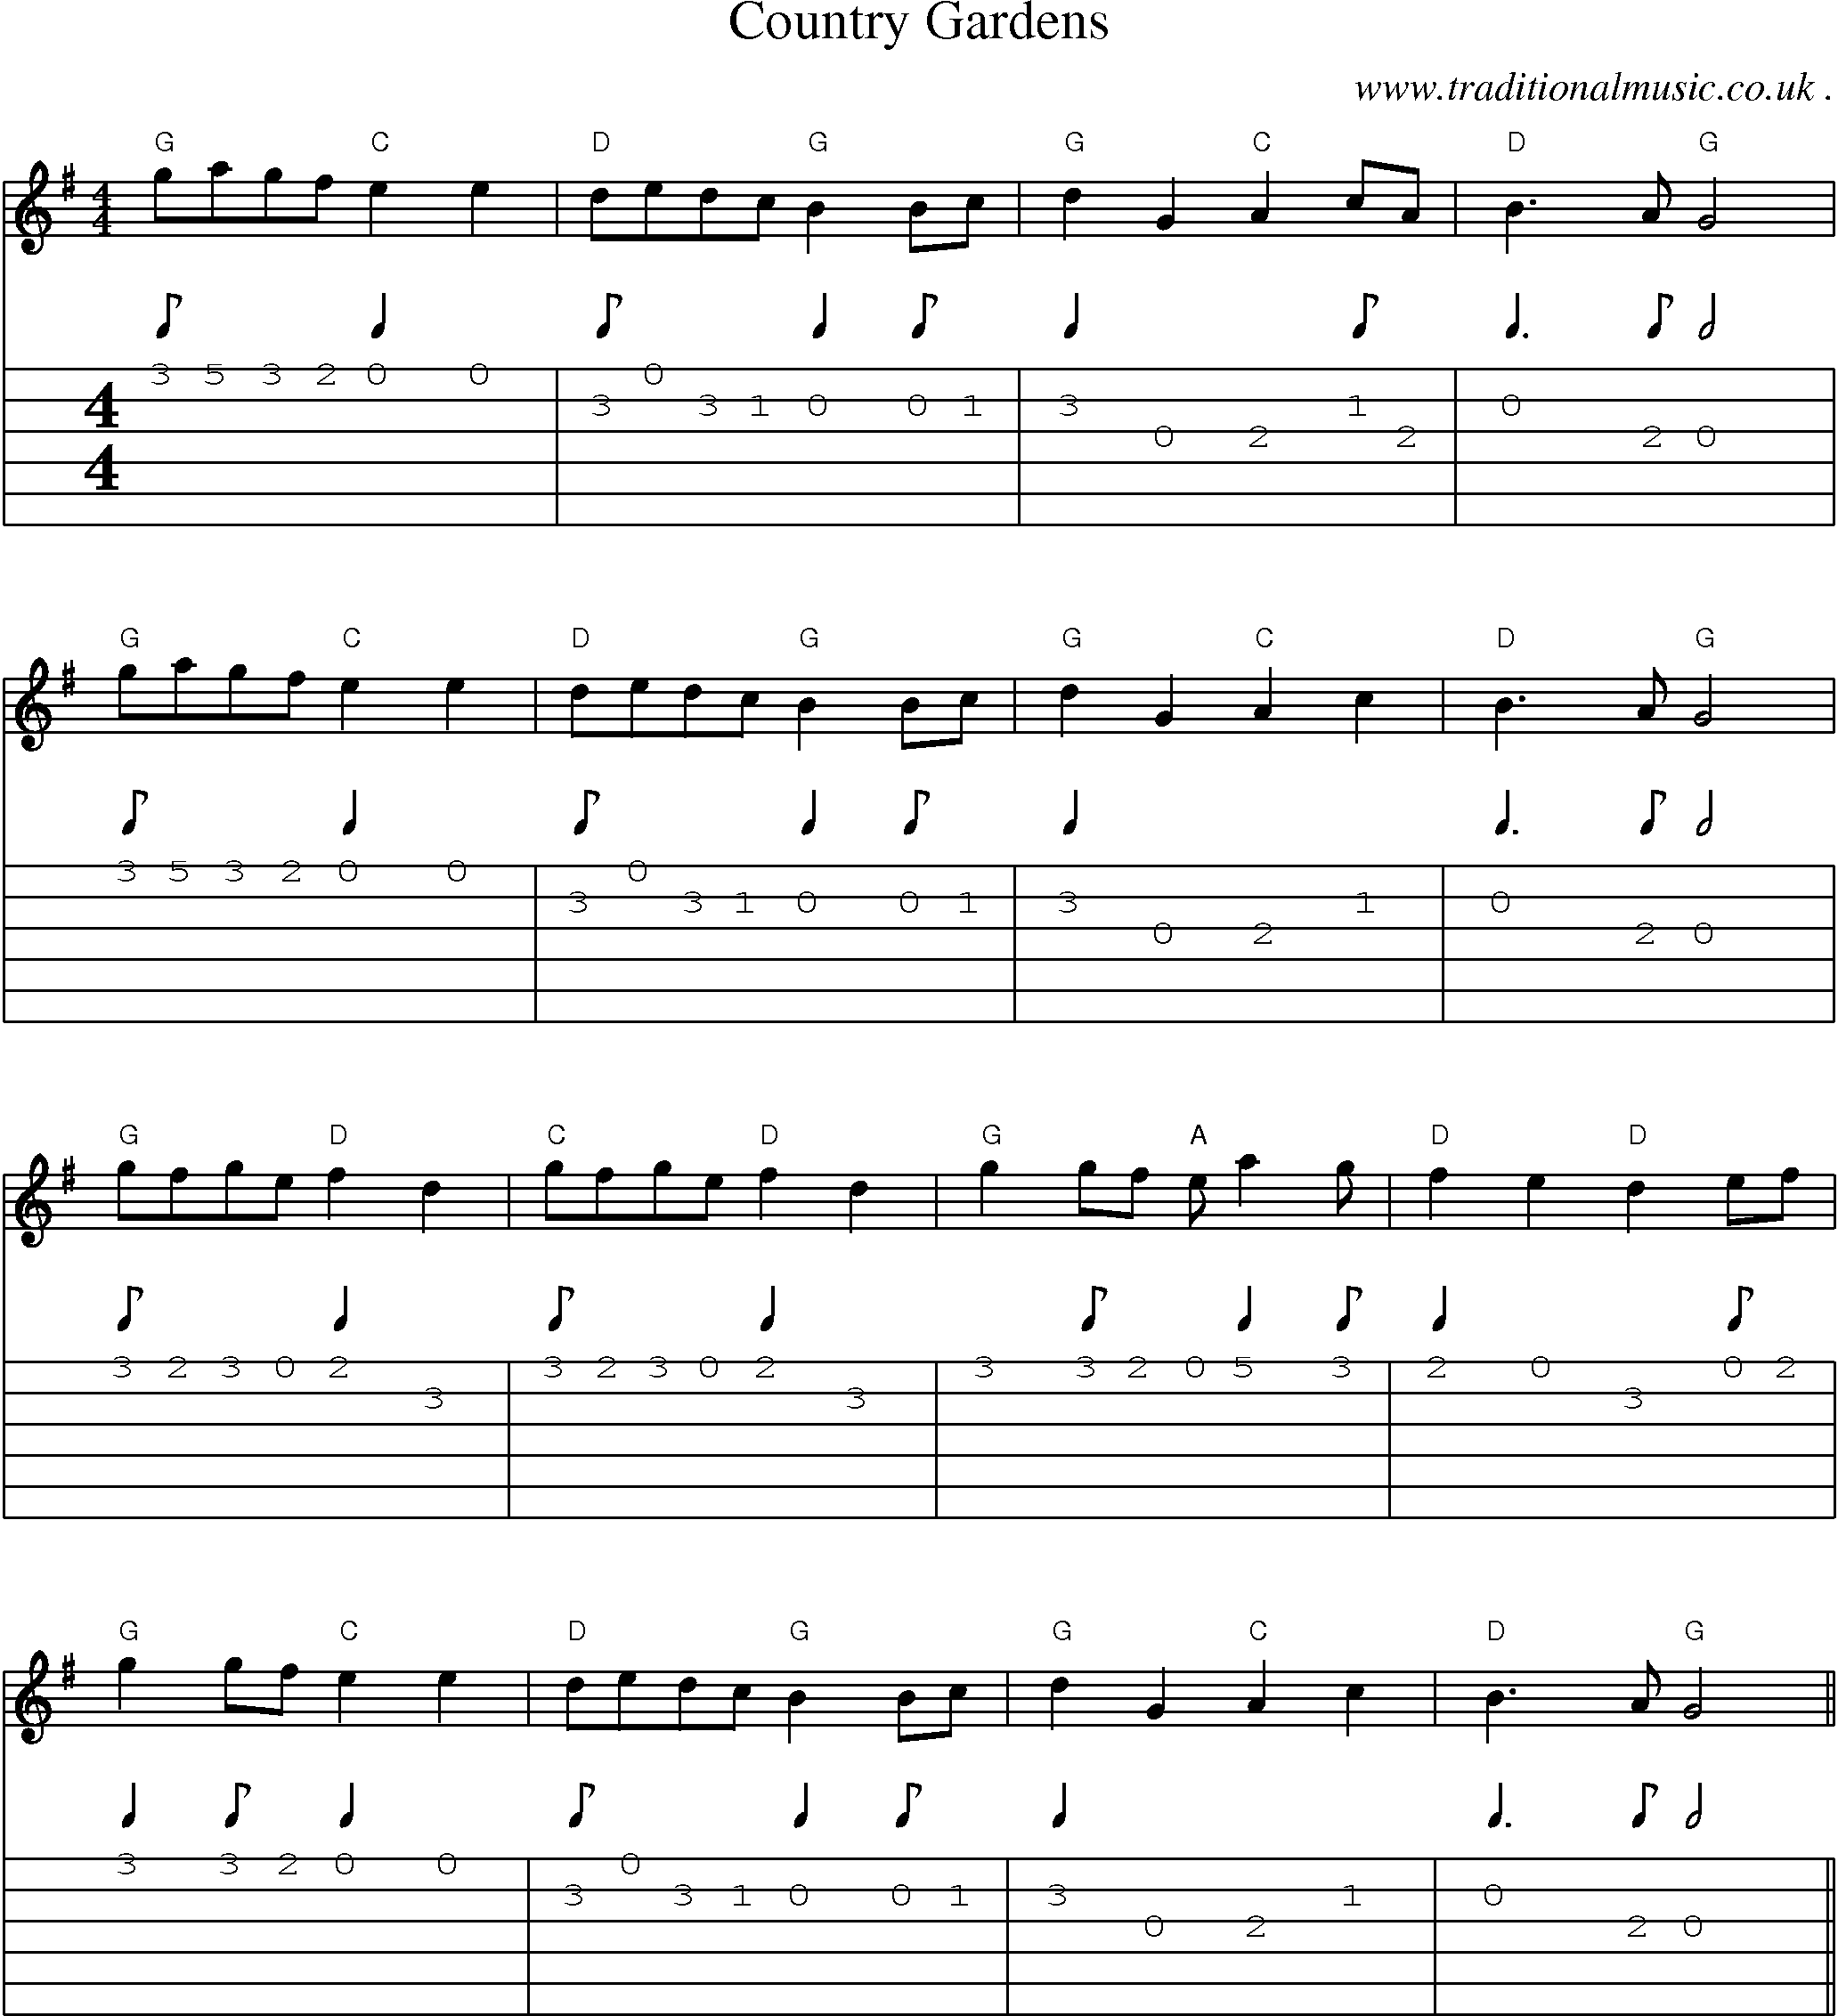 Music Score and Guitar Tabs for Country Gardens